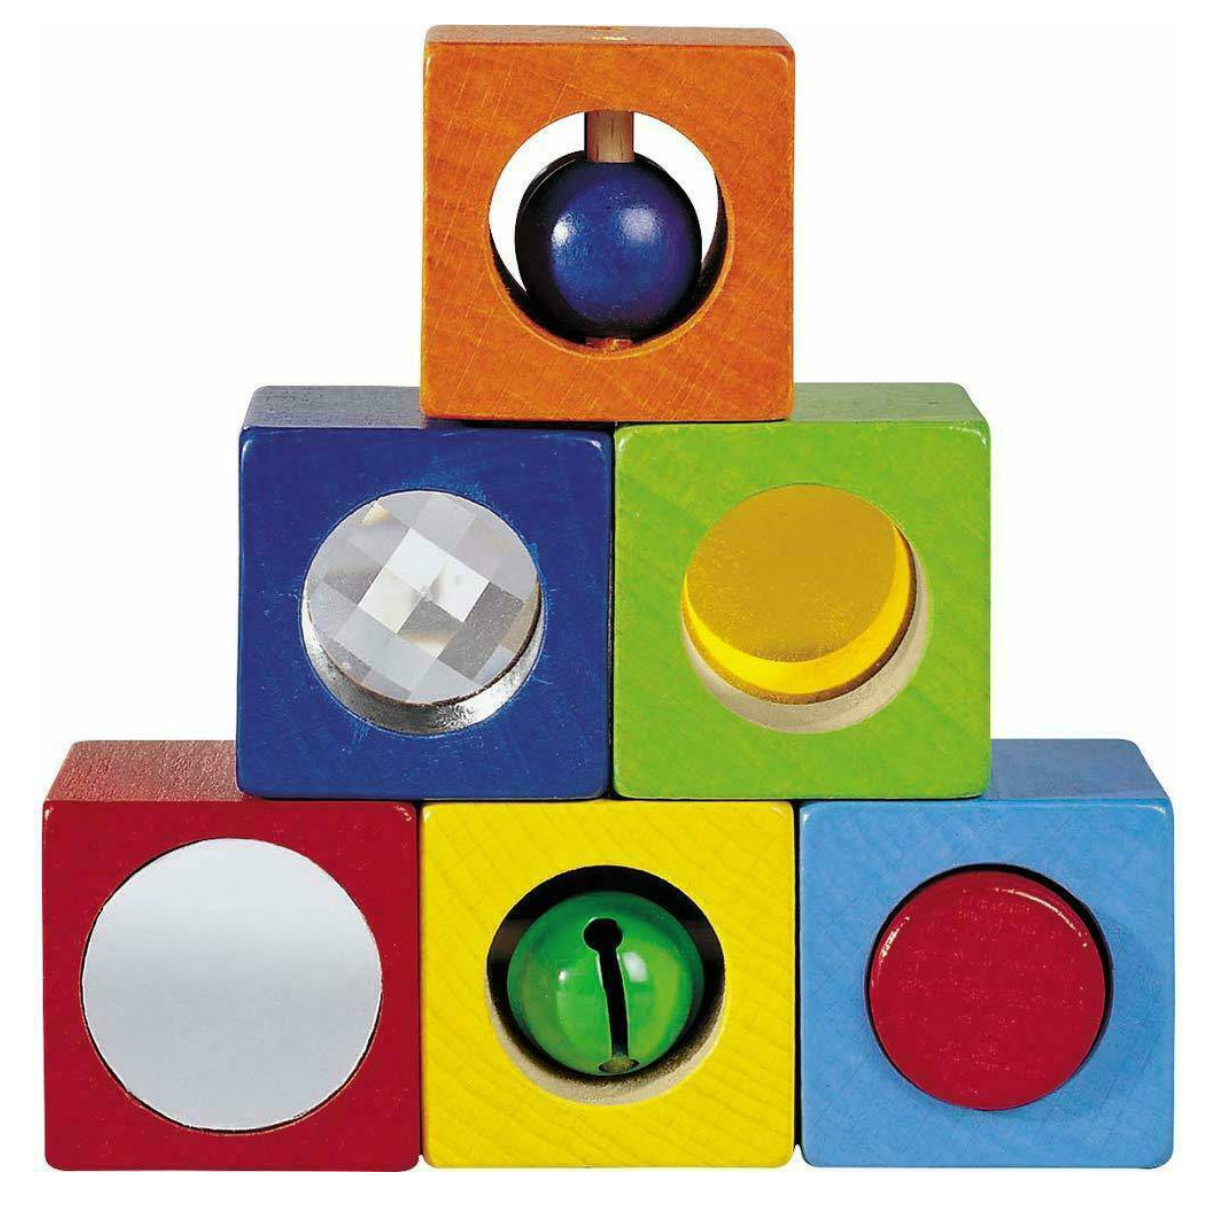 Discovery Blocks by Haba